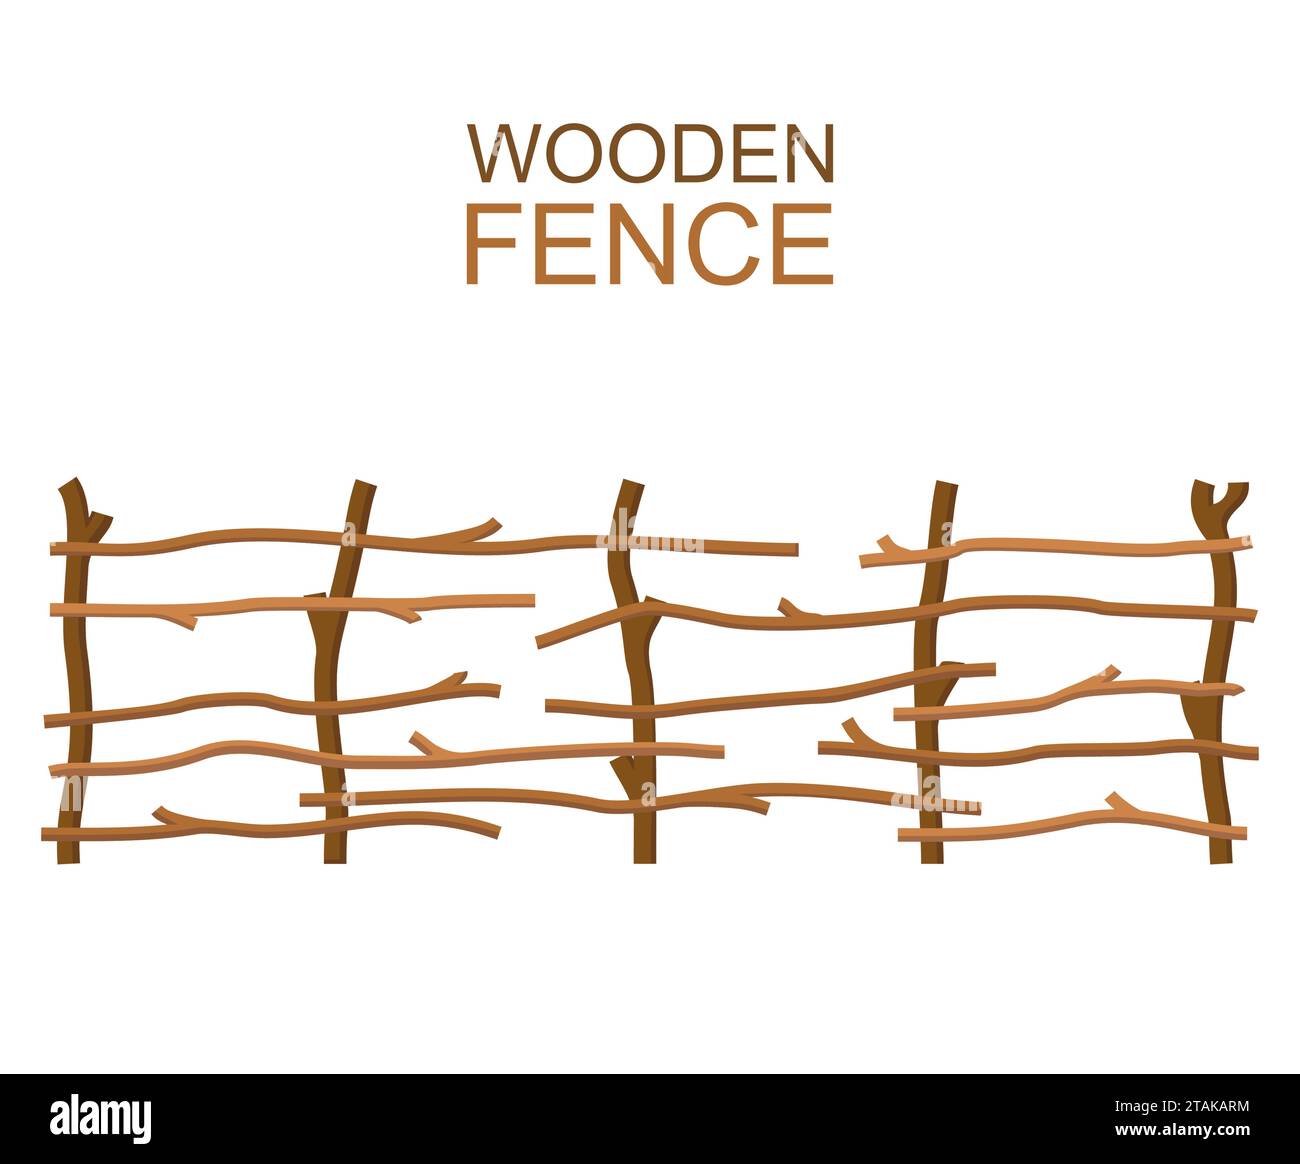 Rural wooden fence isolated on white background. Farm fence vector illustration. Branches fence rustic wood silhouette construction in flat style Stock Vector